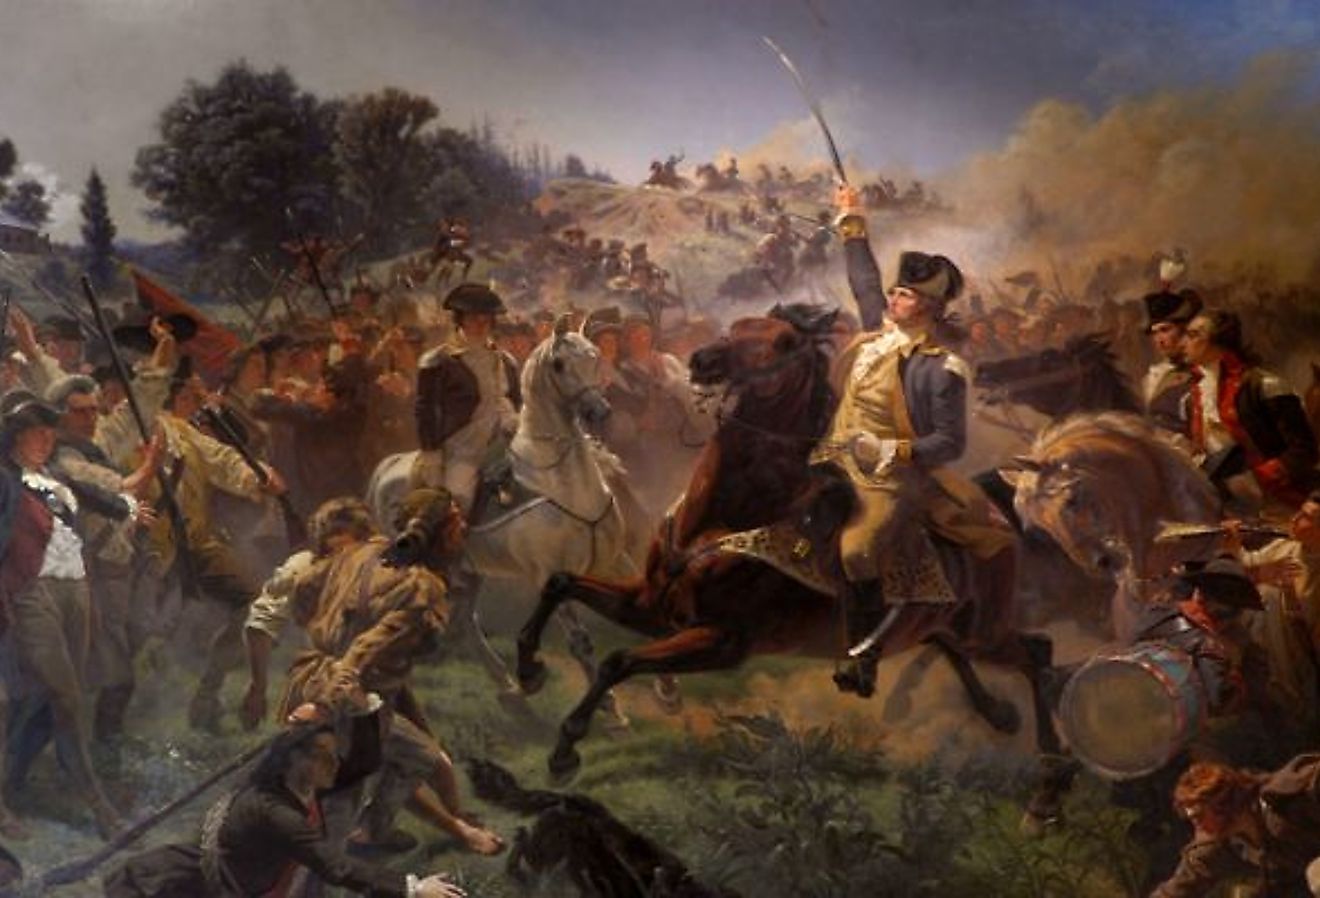 Washington Rallying the Troops during the Battle of Monmouth.